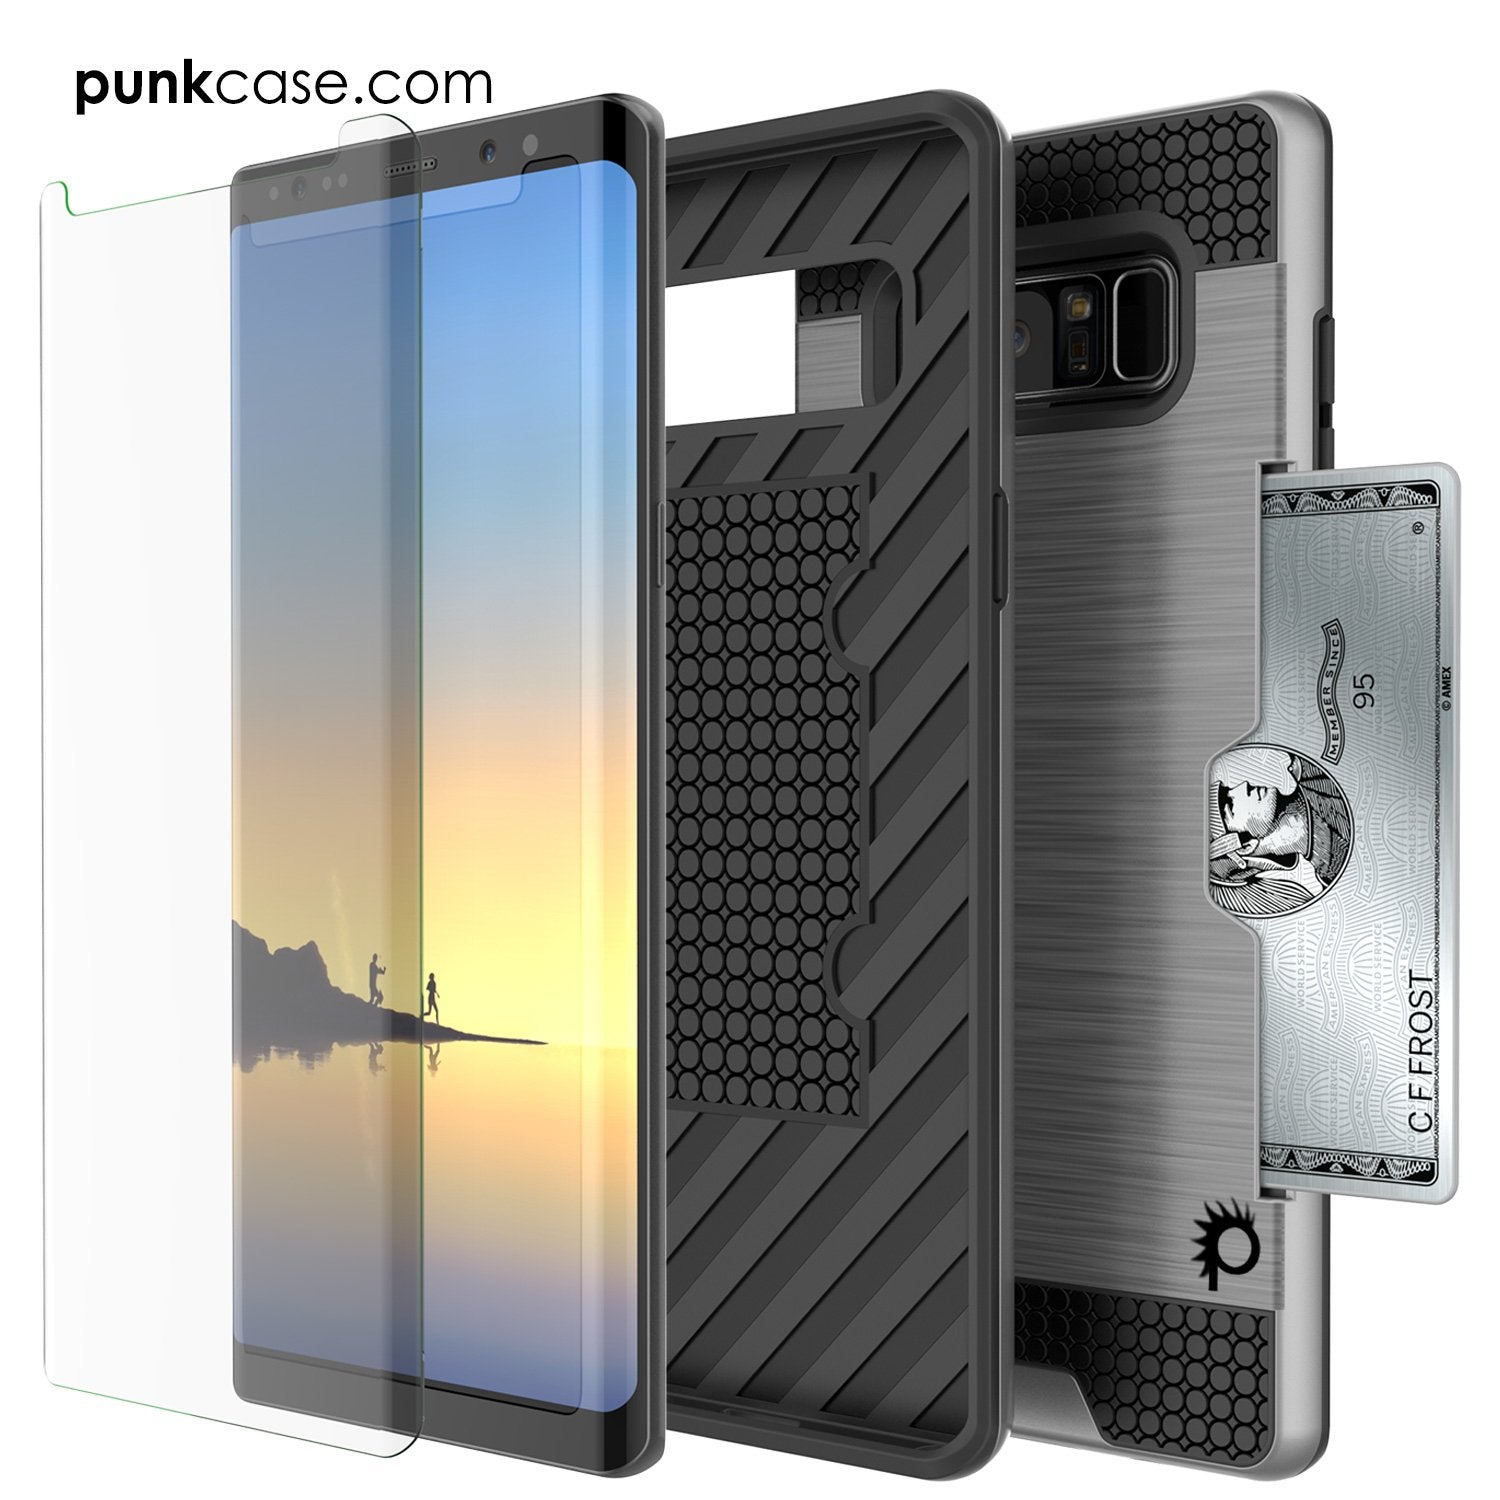 Galaxy Note 8 Case, PUNKcase [SLOT Series] [Slim Fit] Dual-Layer Armor Cover w/Integrated Anti-Shock System, Credit Card Slot [Grey] - PunkCase NZ